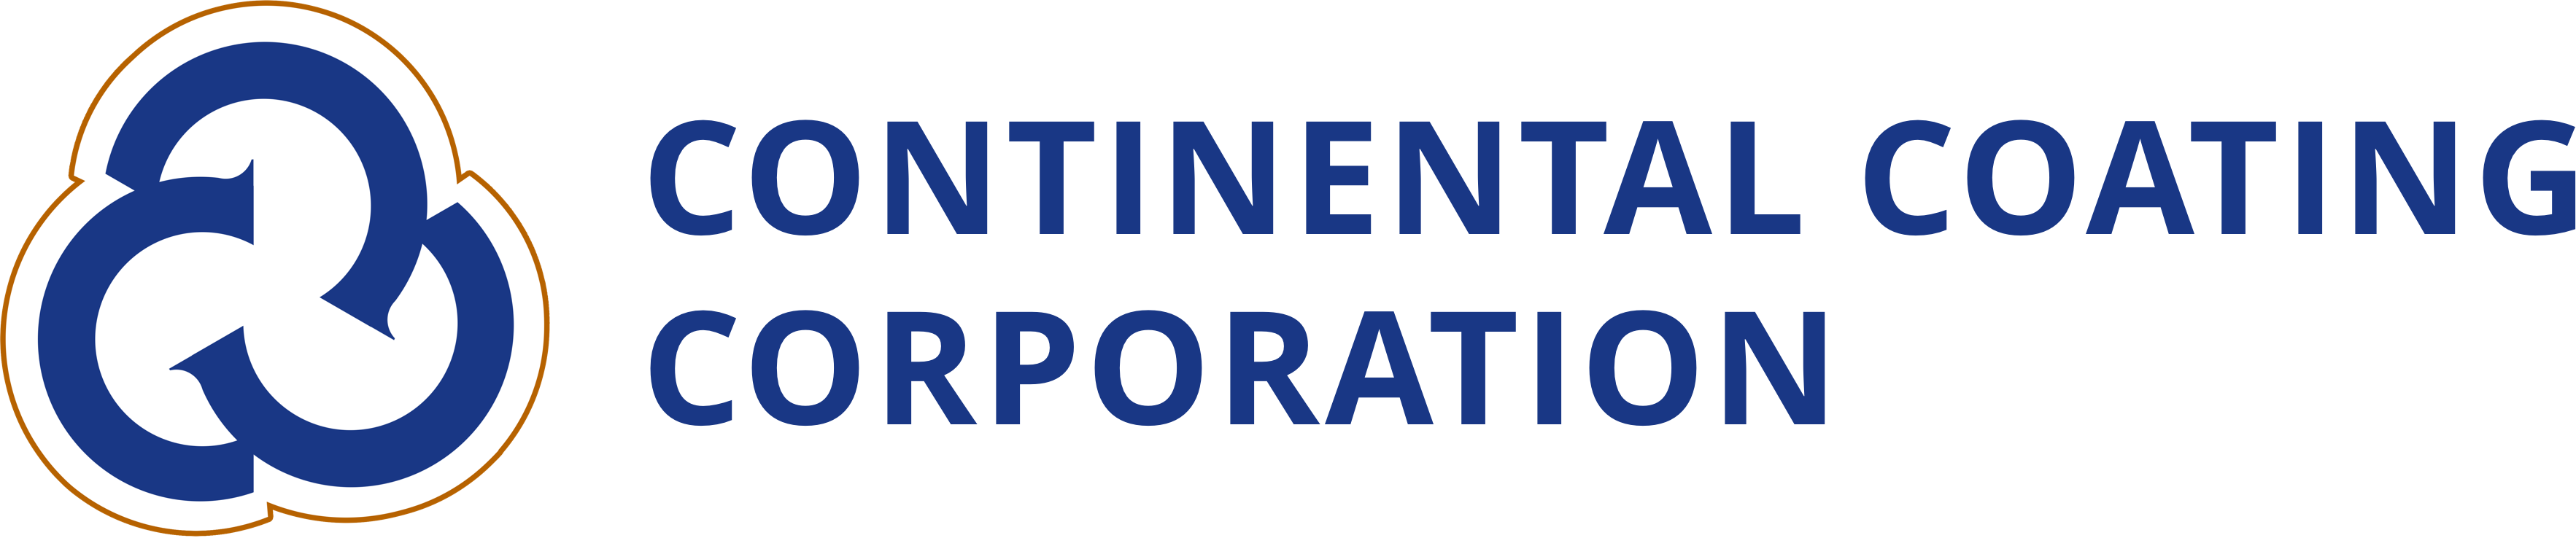 Continental Coating Corporation